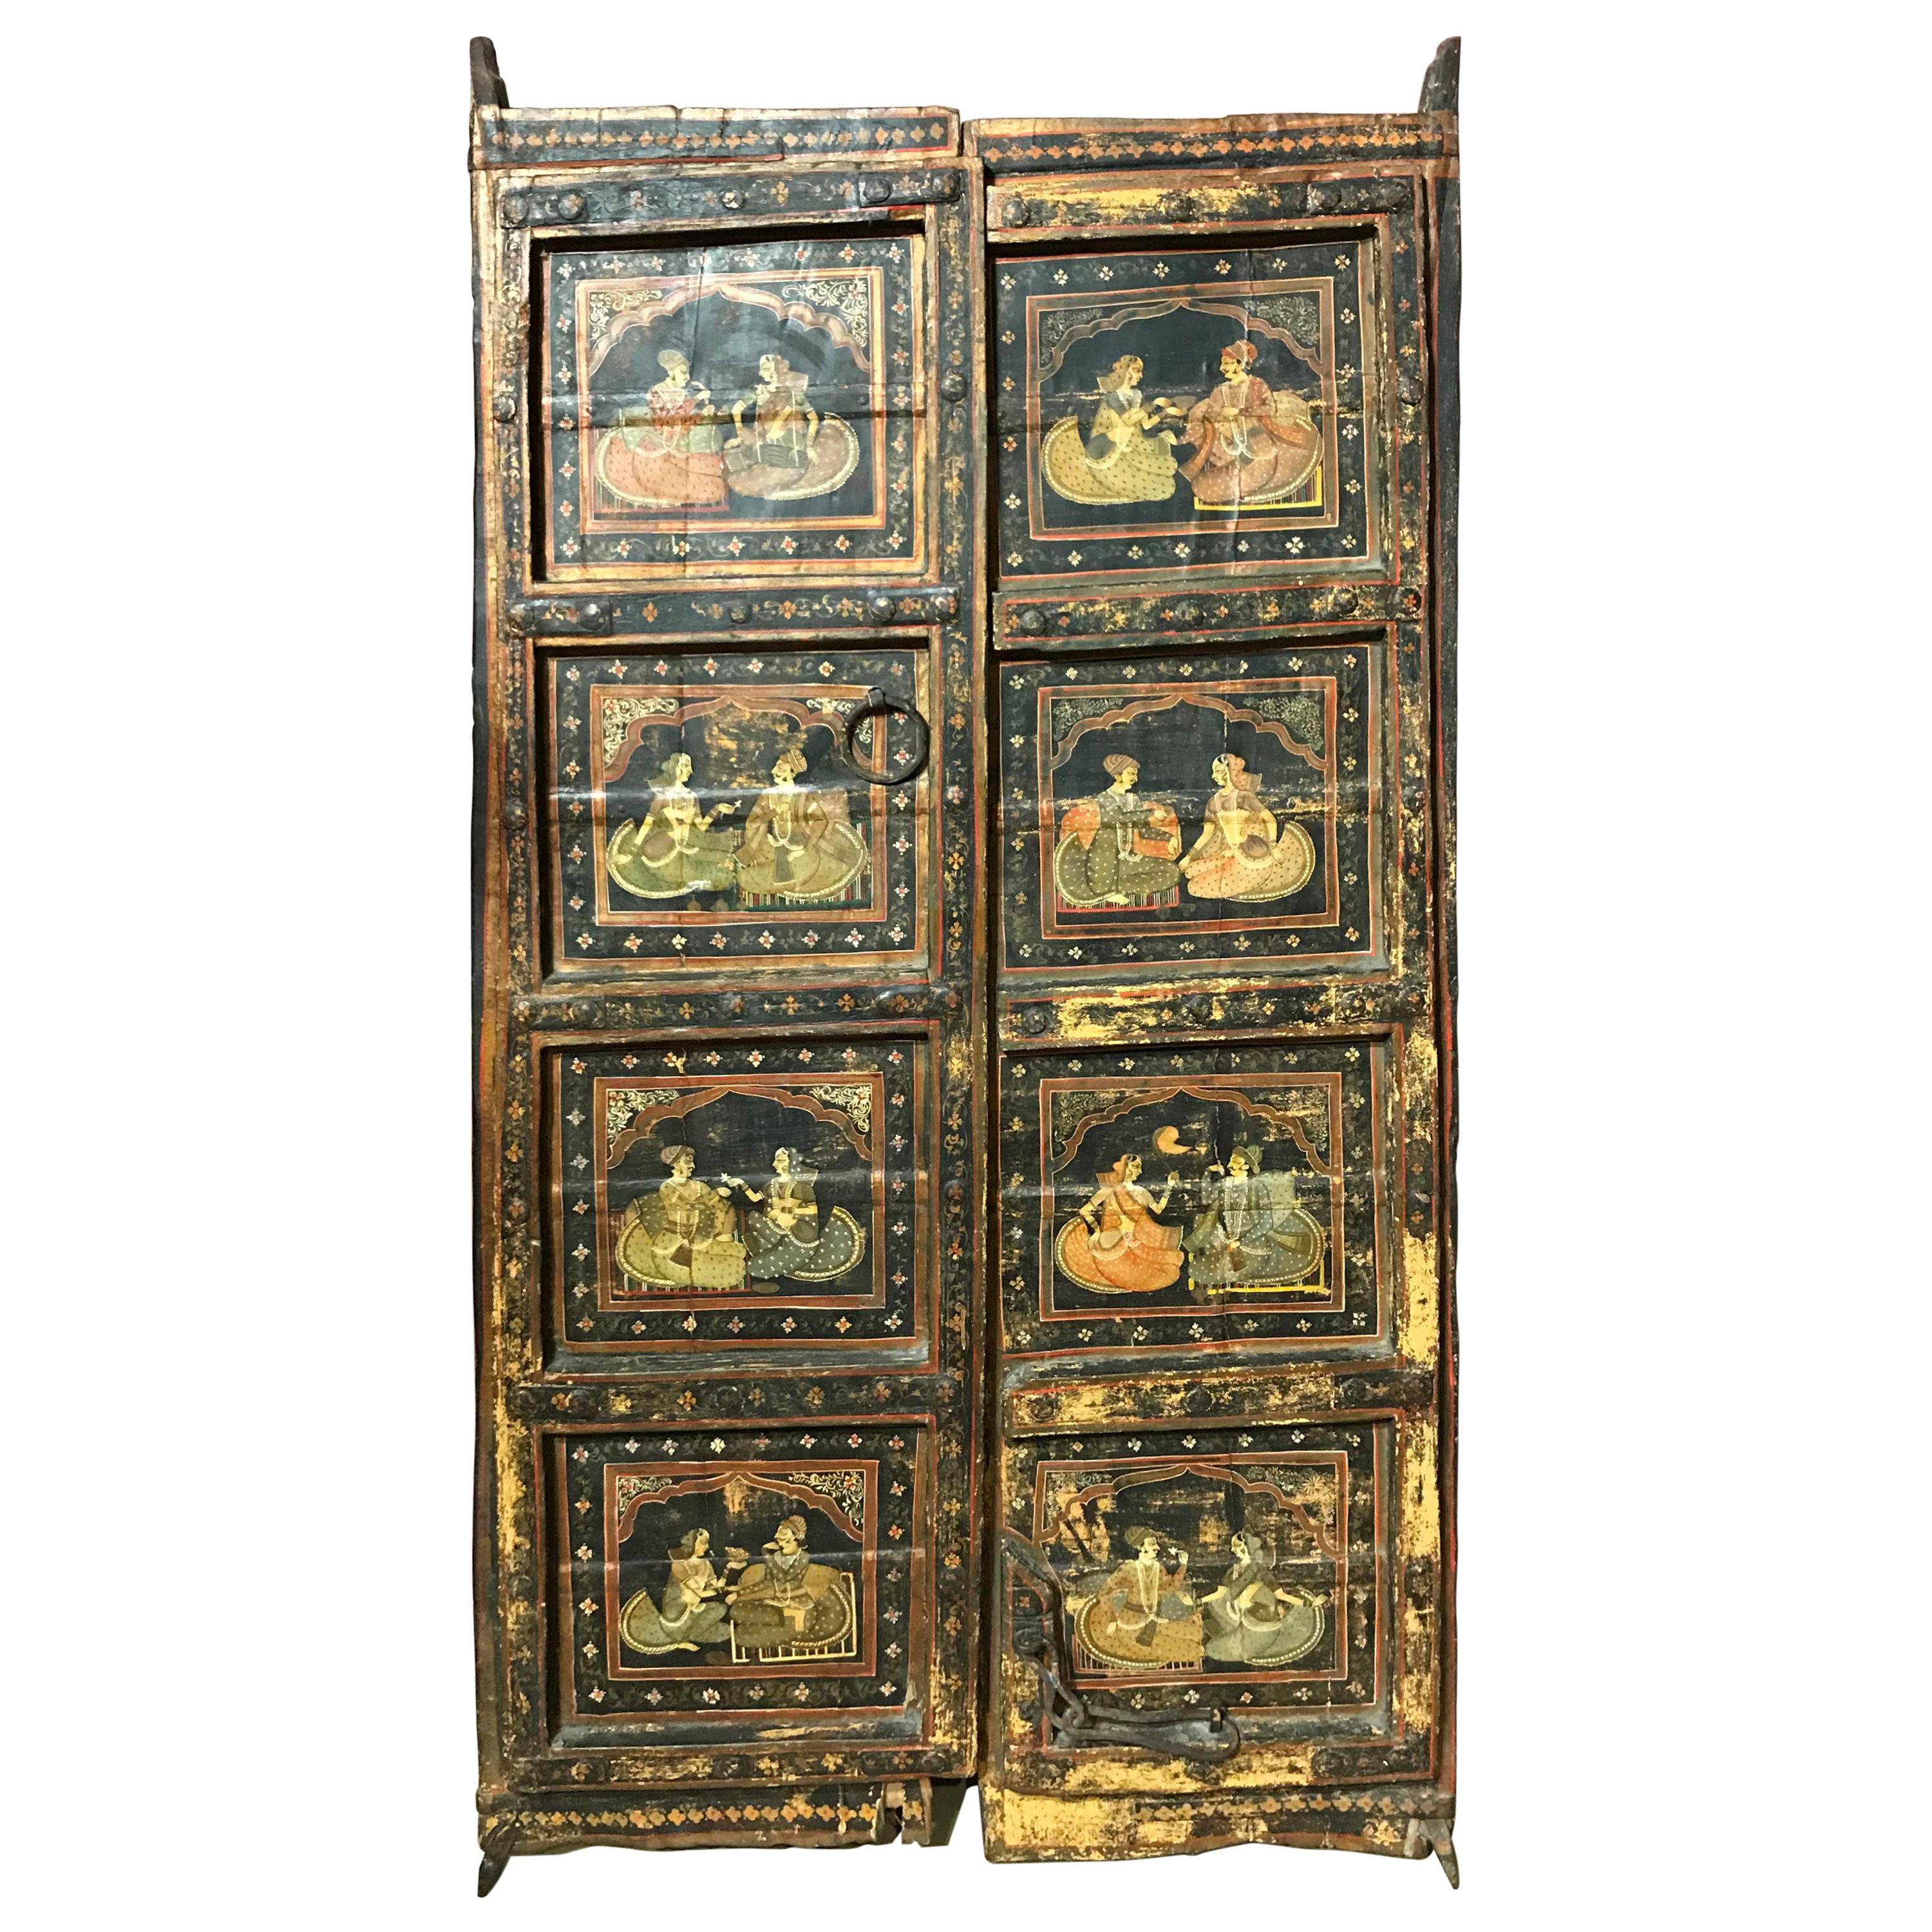 Pair of 19th Century Polychrome Wooden Indian Doors with Genre Scenes